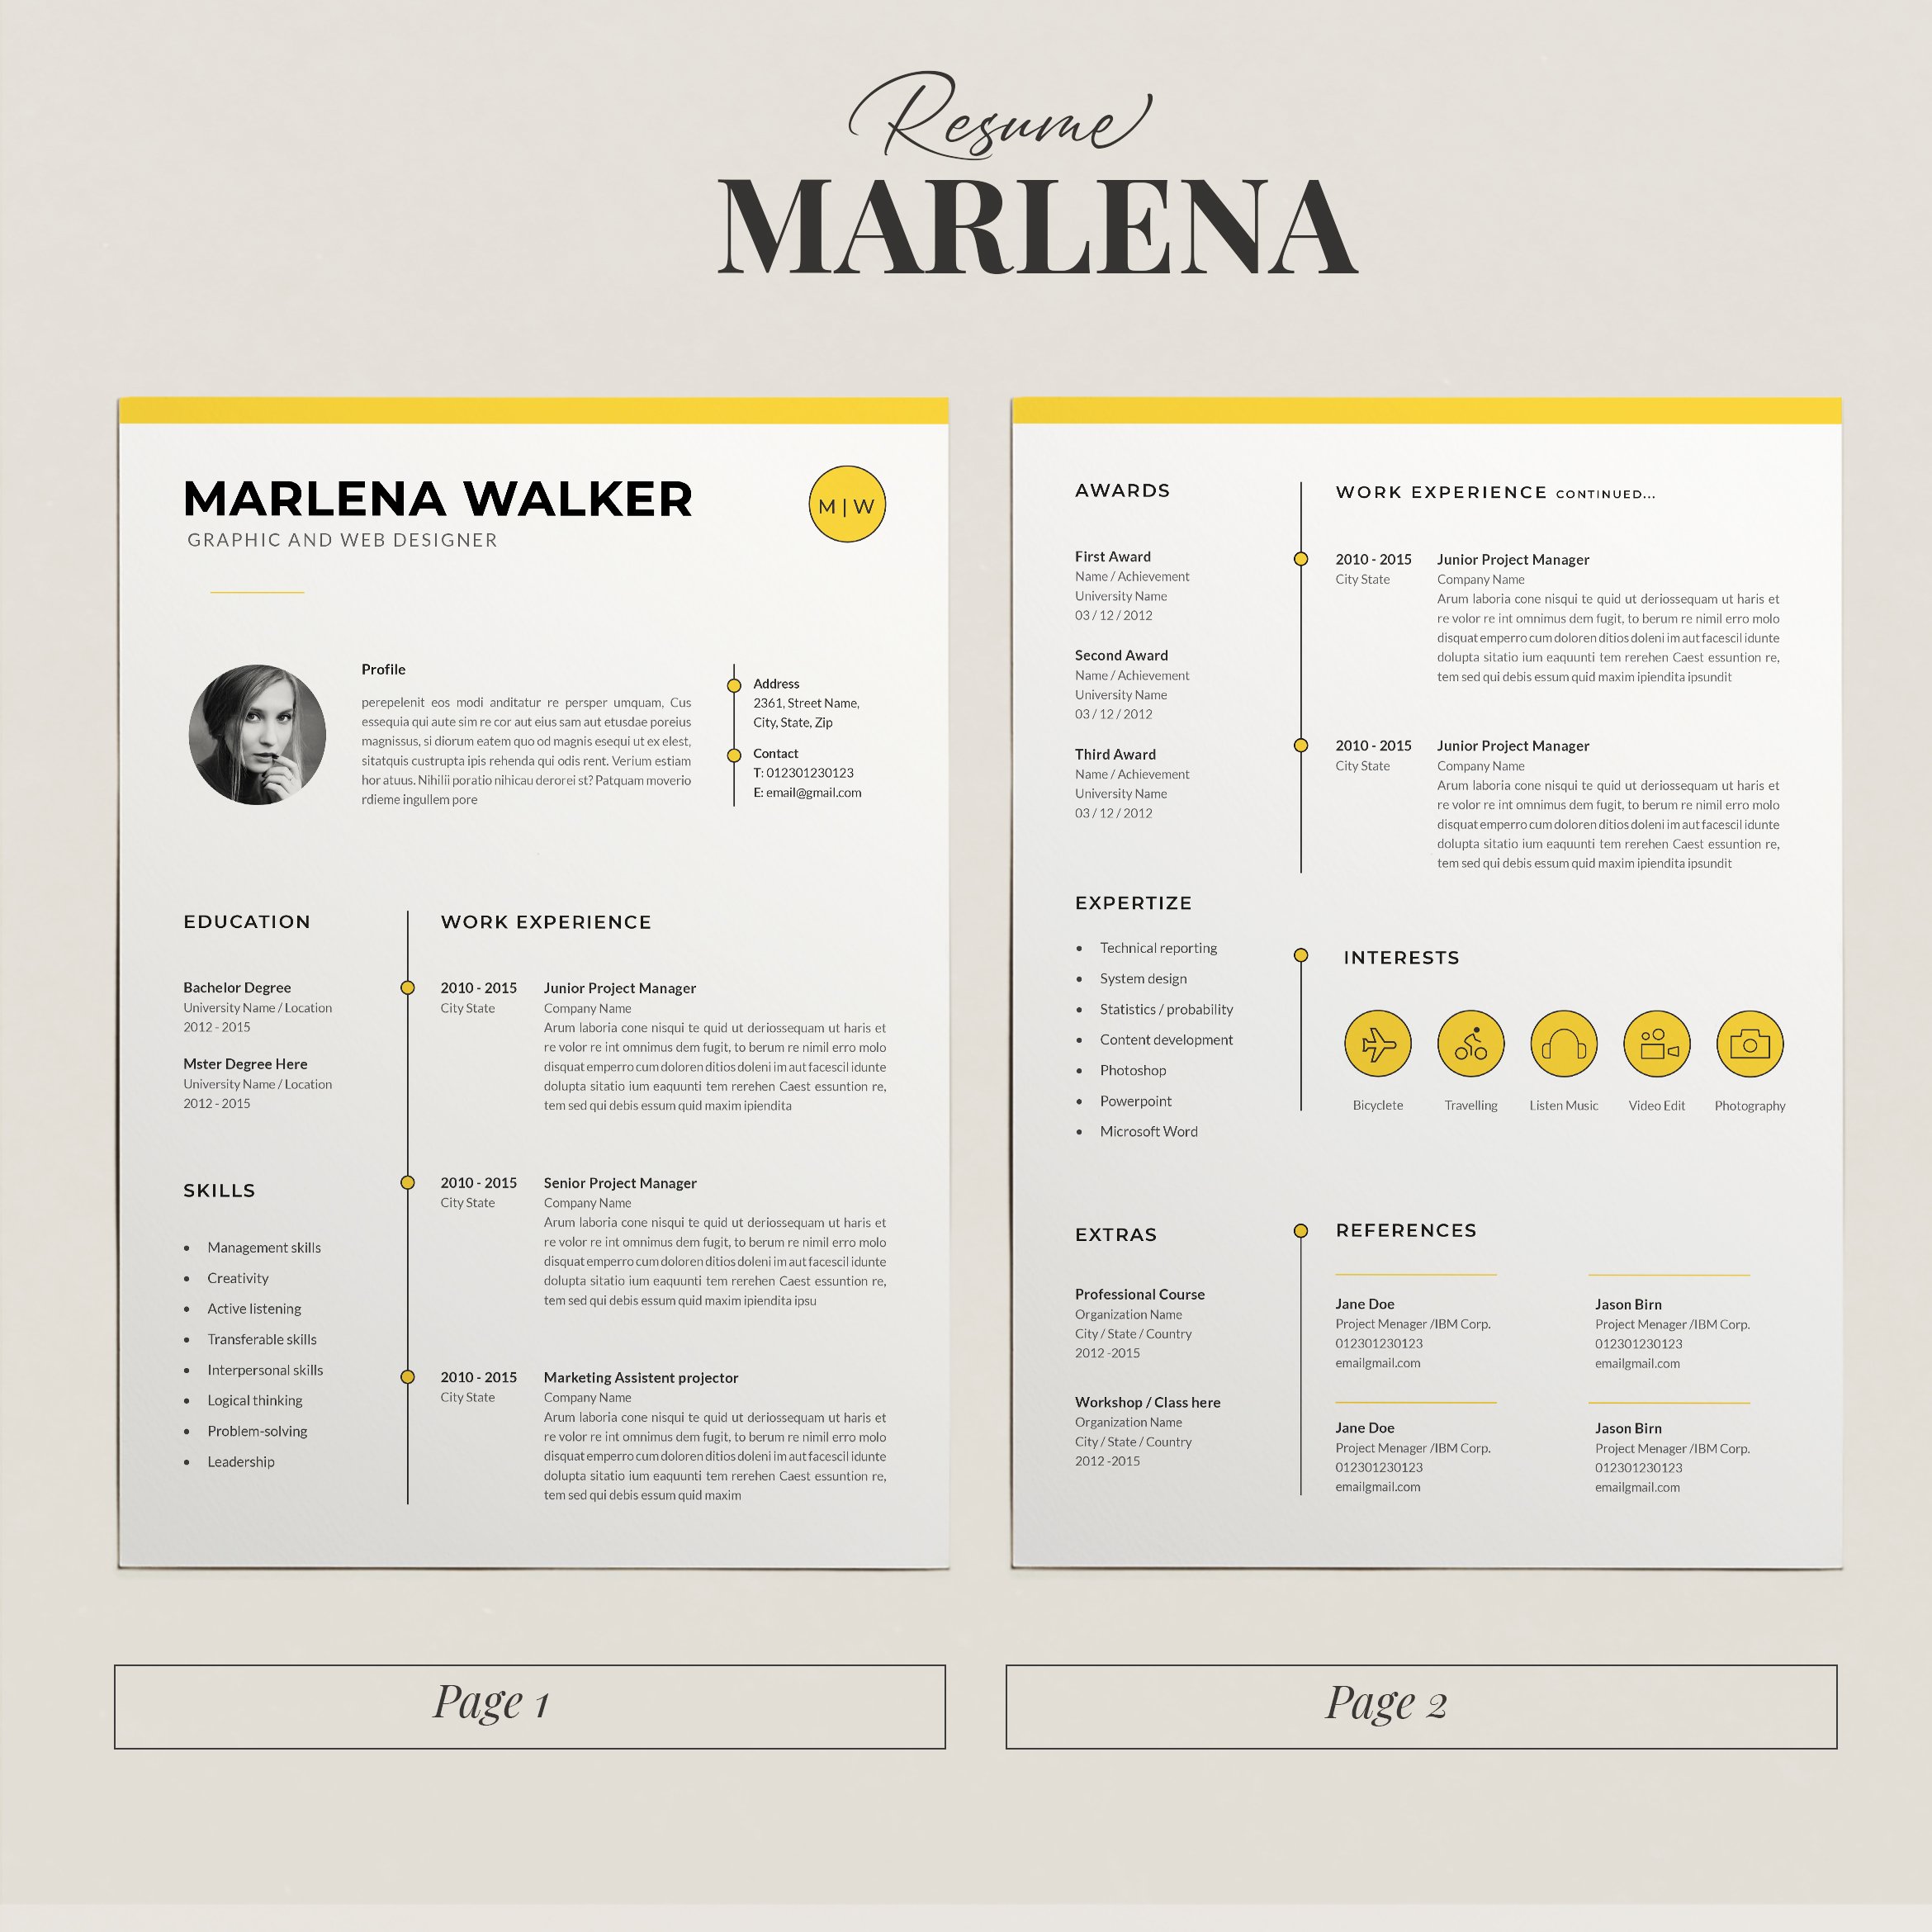 Resume Template Marlena cover image.